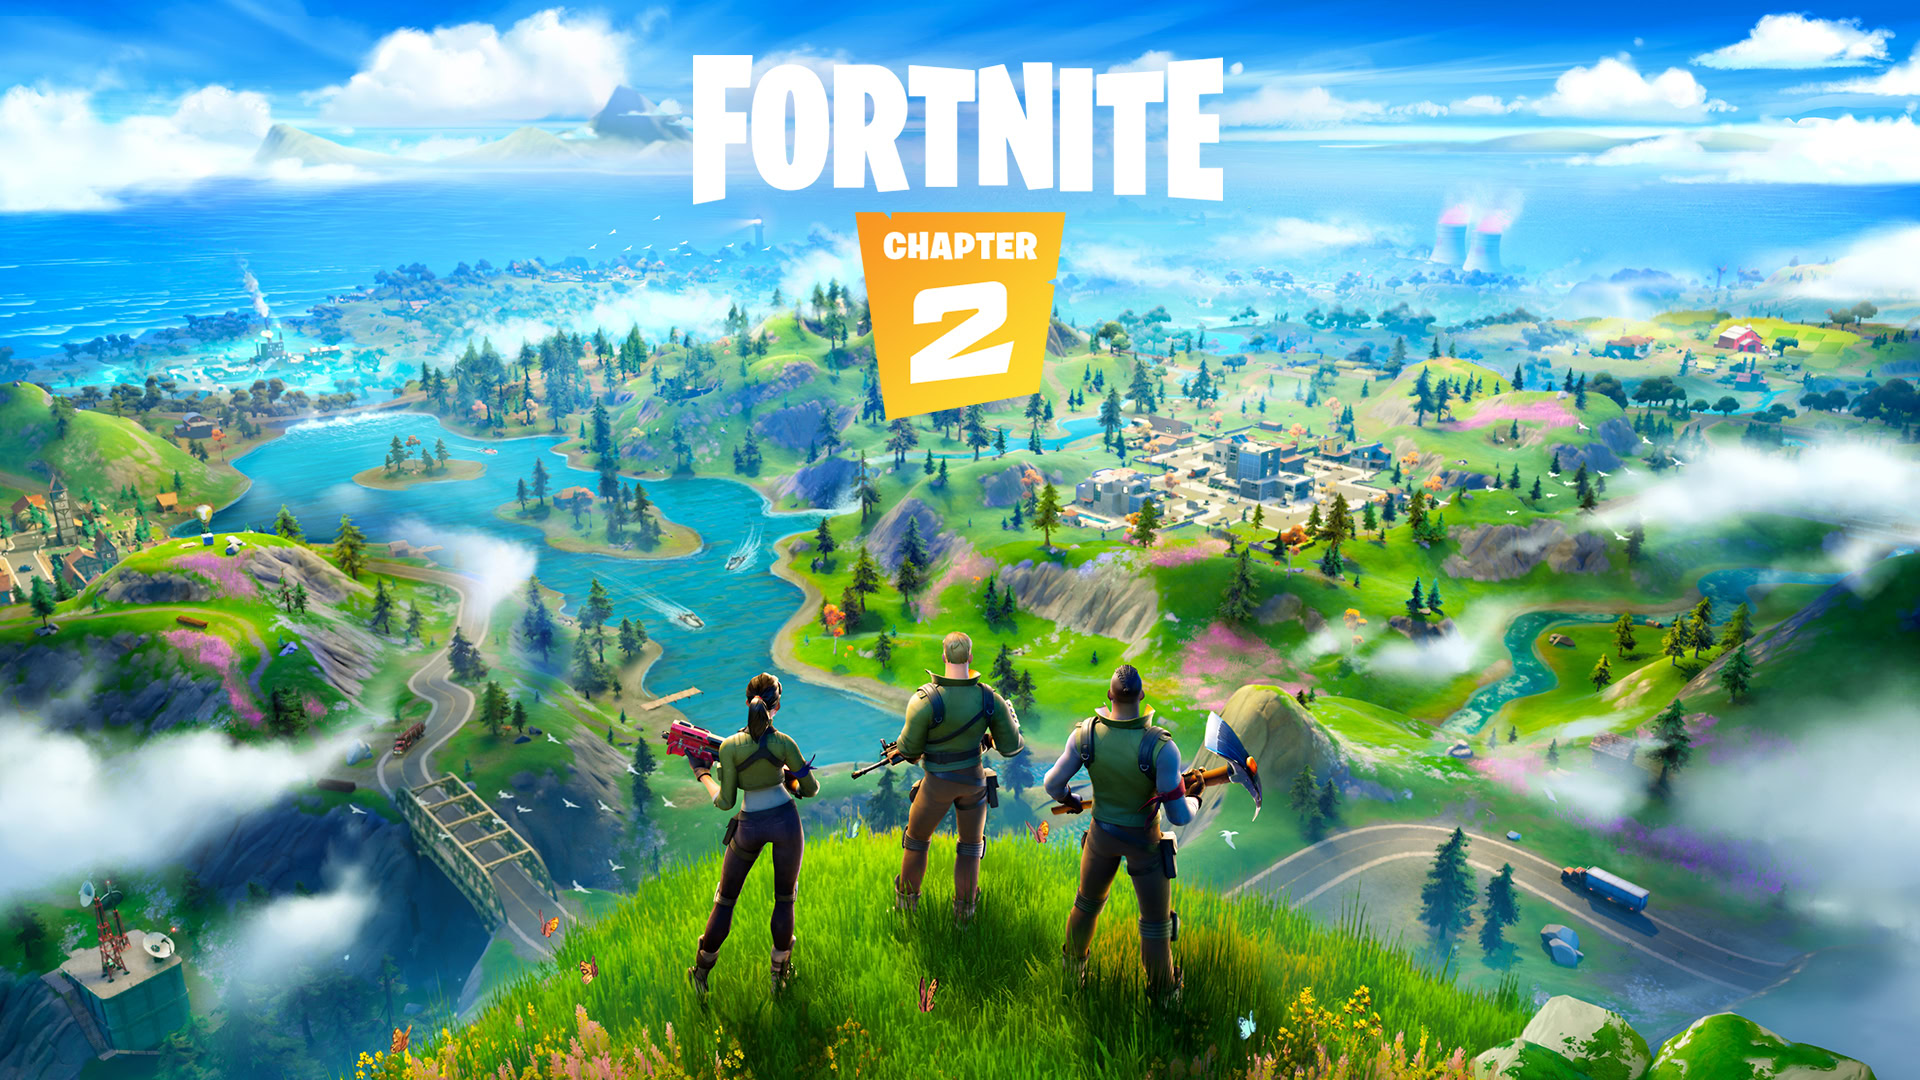 https://www.androidauthority.com/wp-content/uploads/2019/10/fortnite-Chapter-2-featured-image.jpg